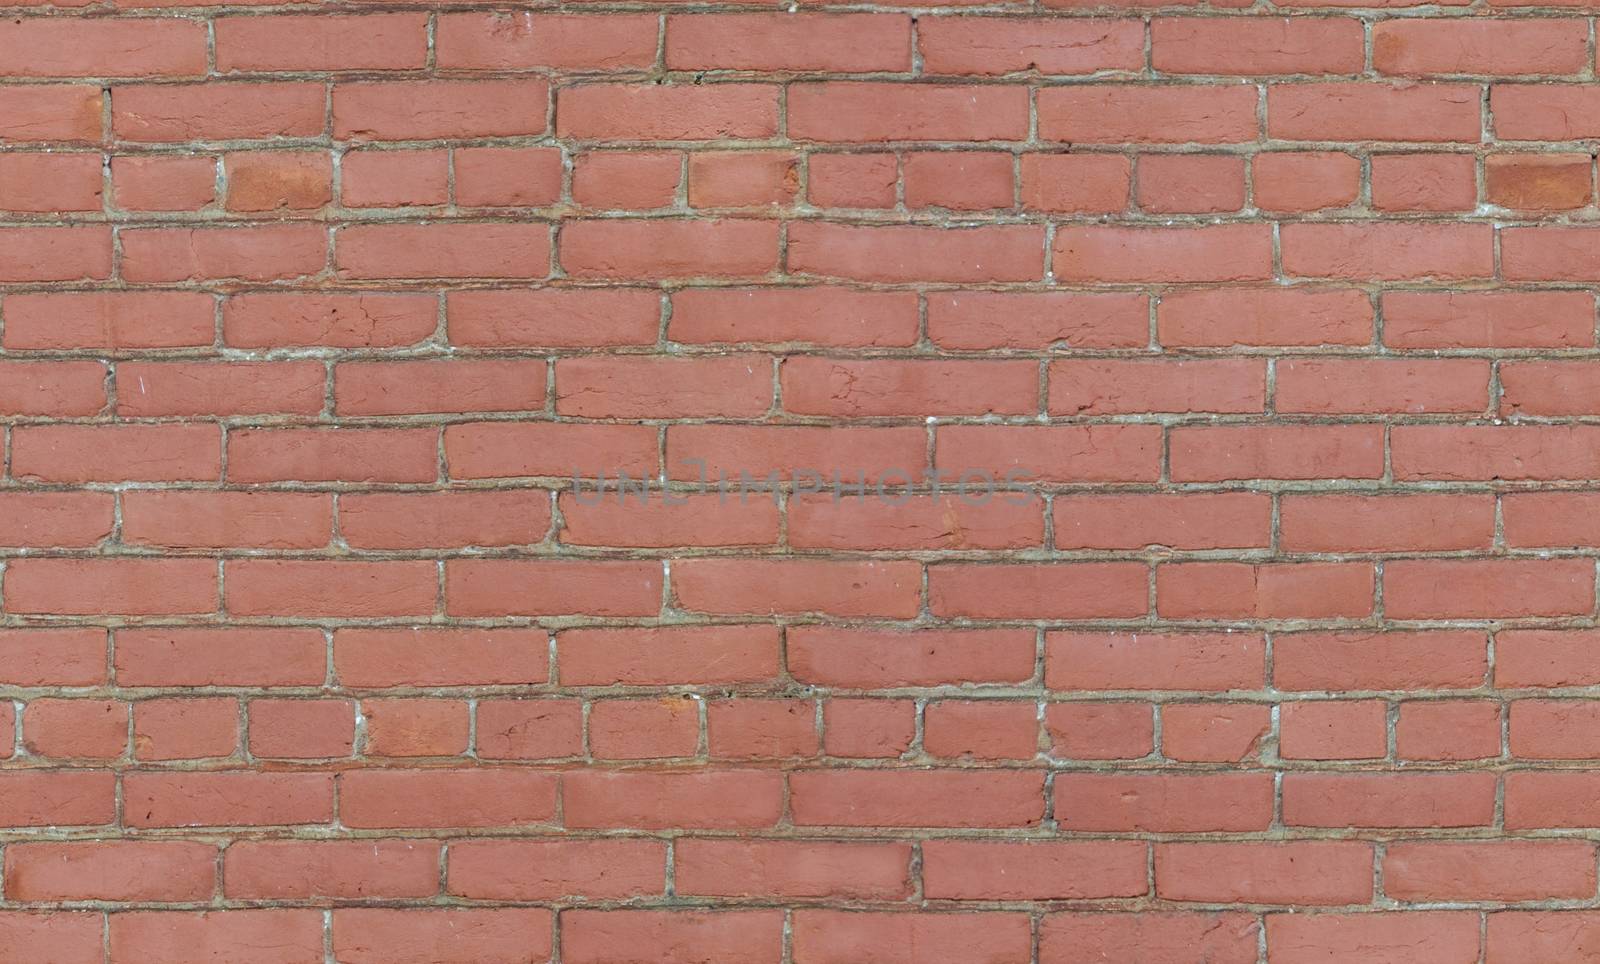 Red brick wall background texture seamlessly tileable by Balefire9